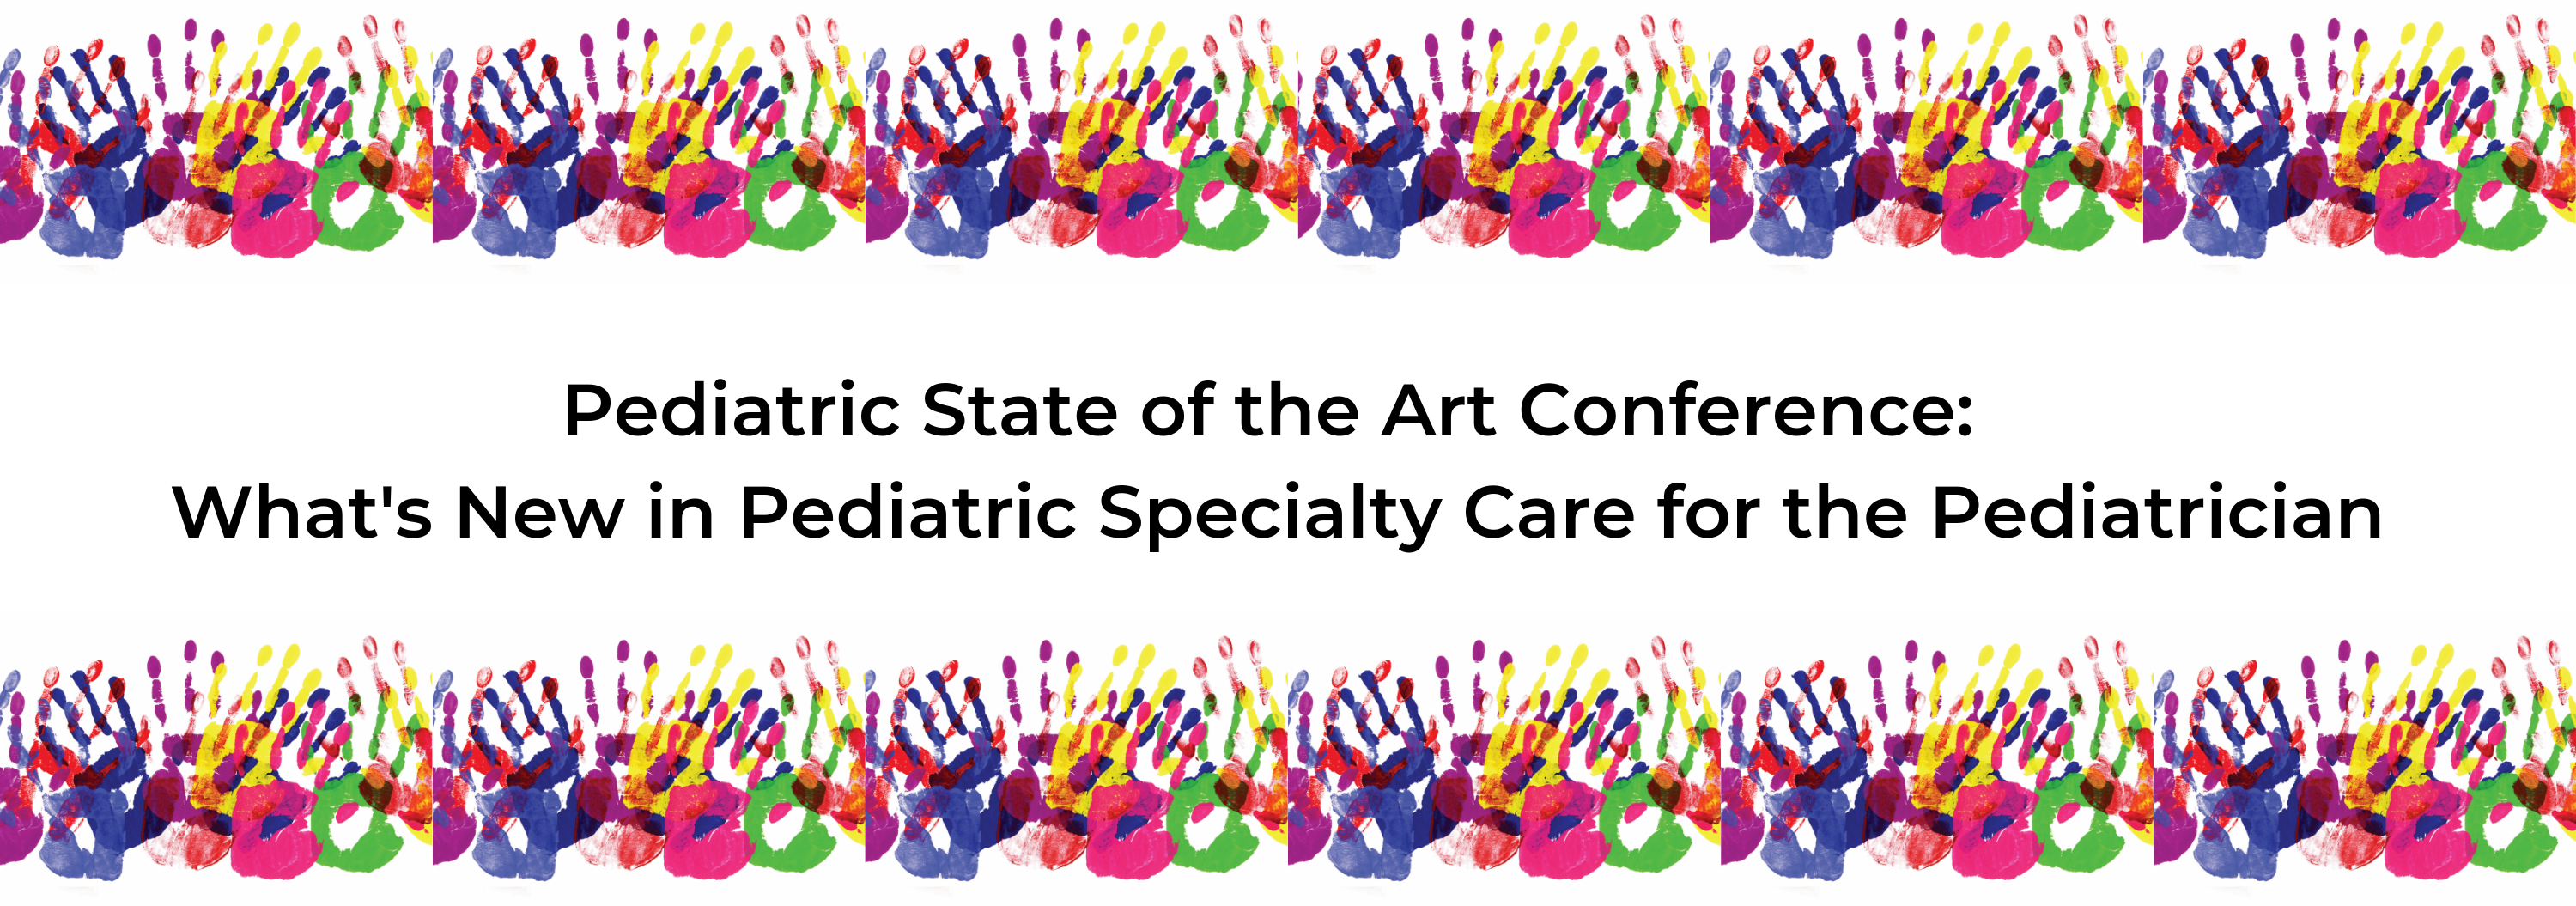 2019 Pediatric State of the Art Conference: What's New in Pediatric Specialty Care for the Pediatrician Banner